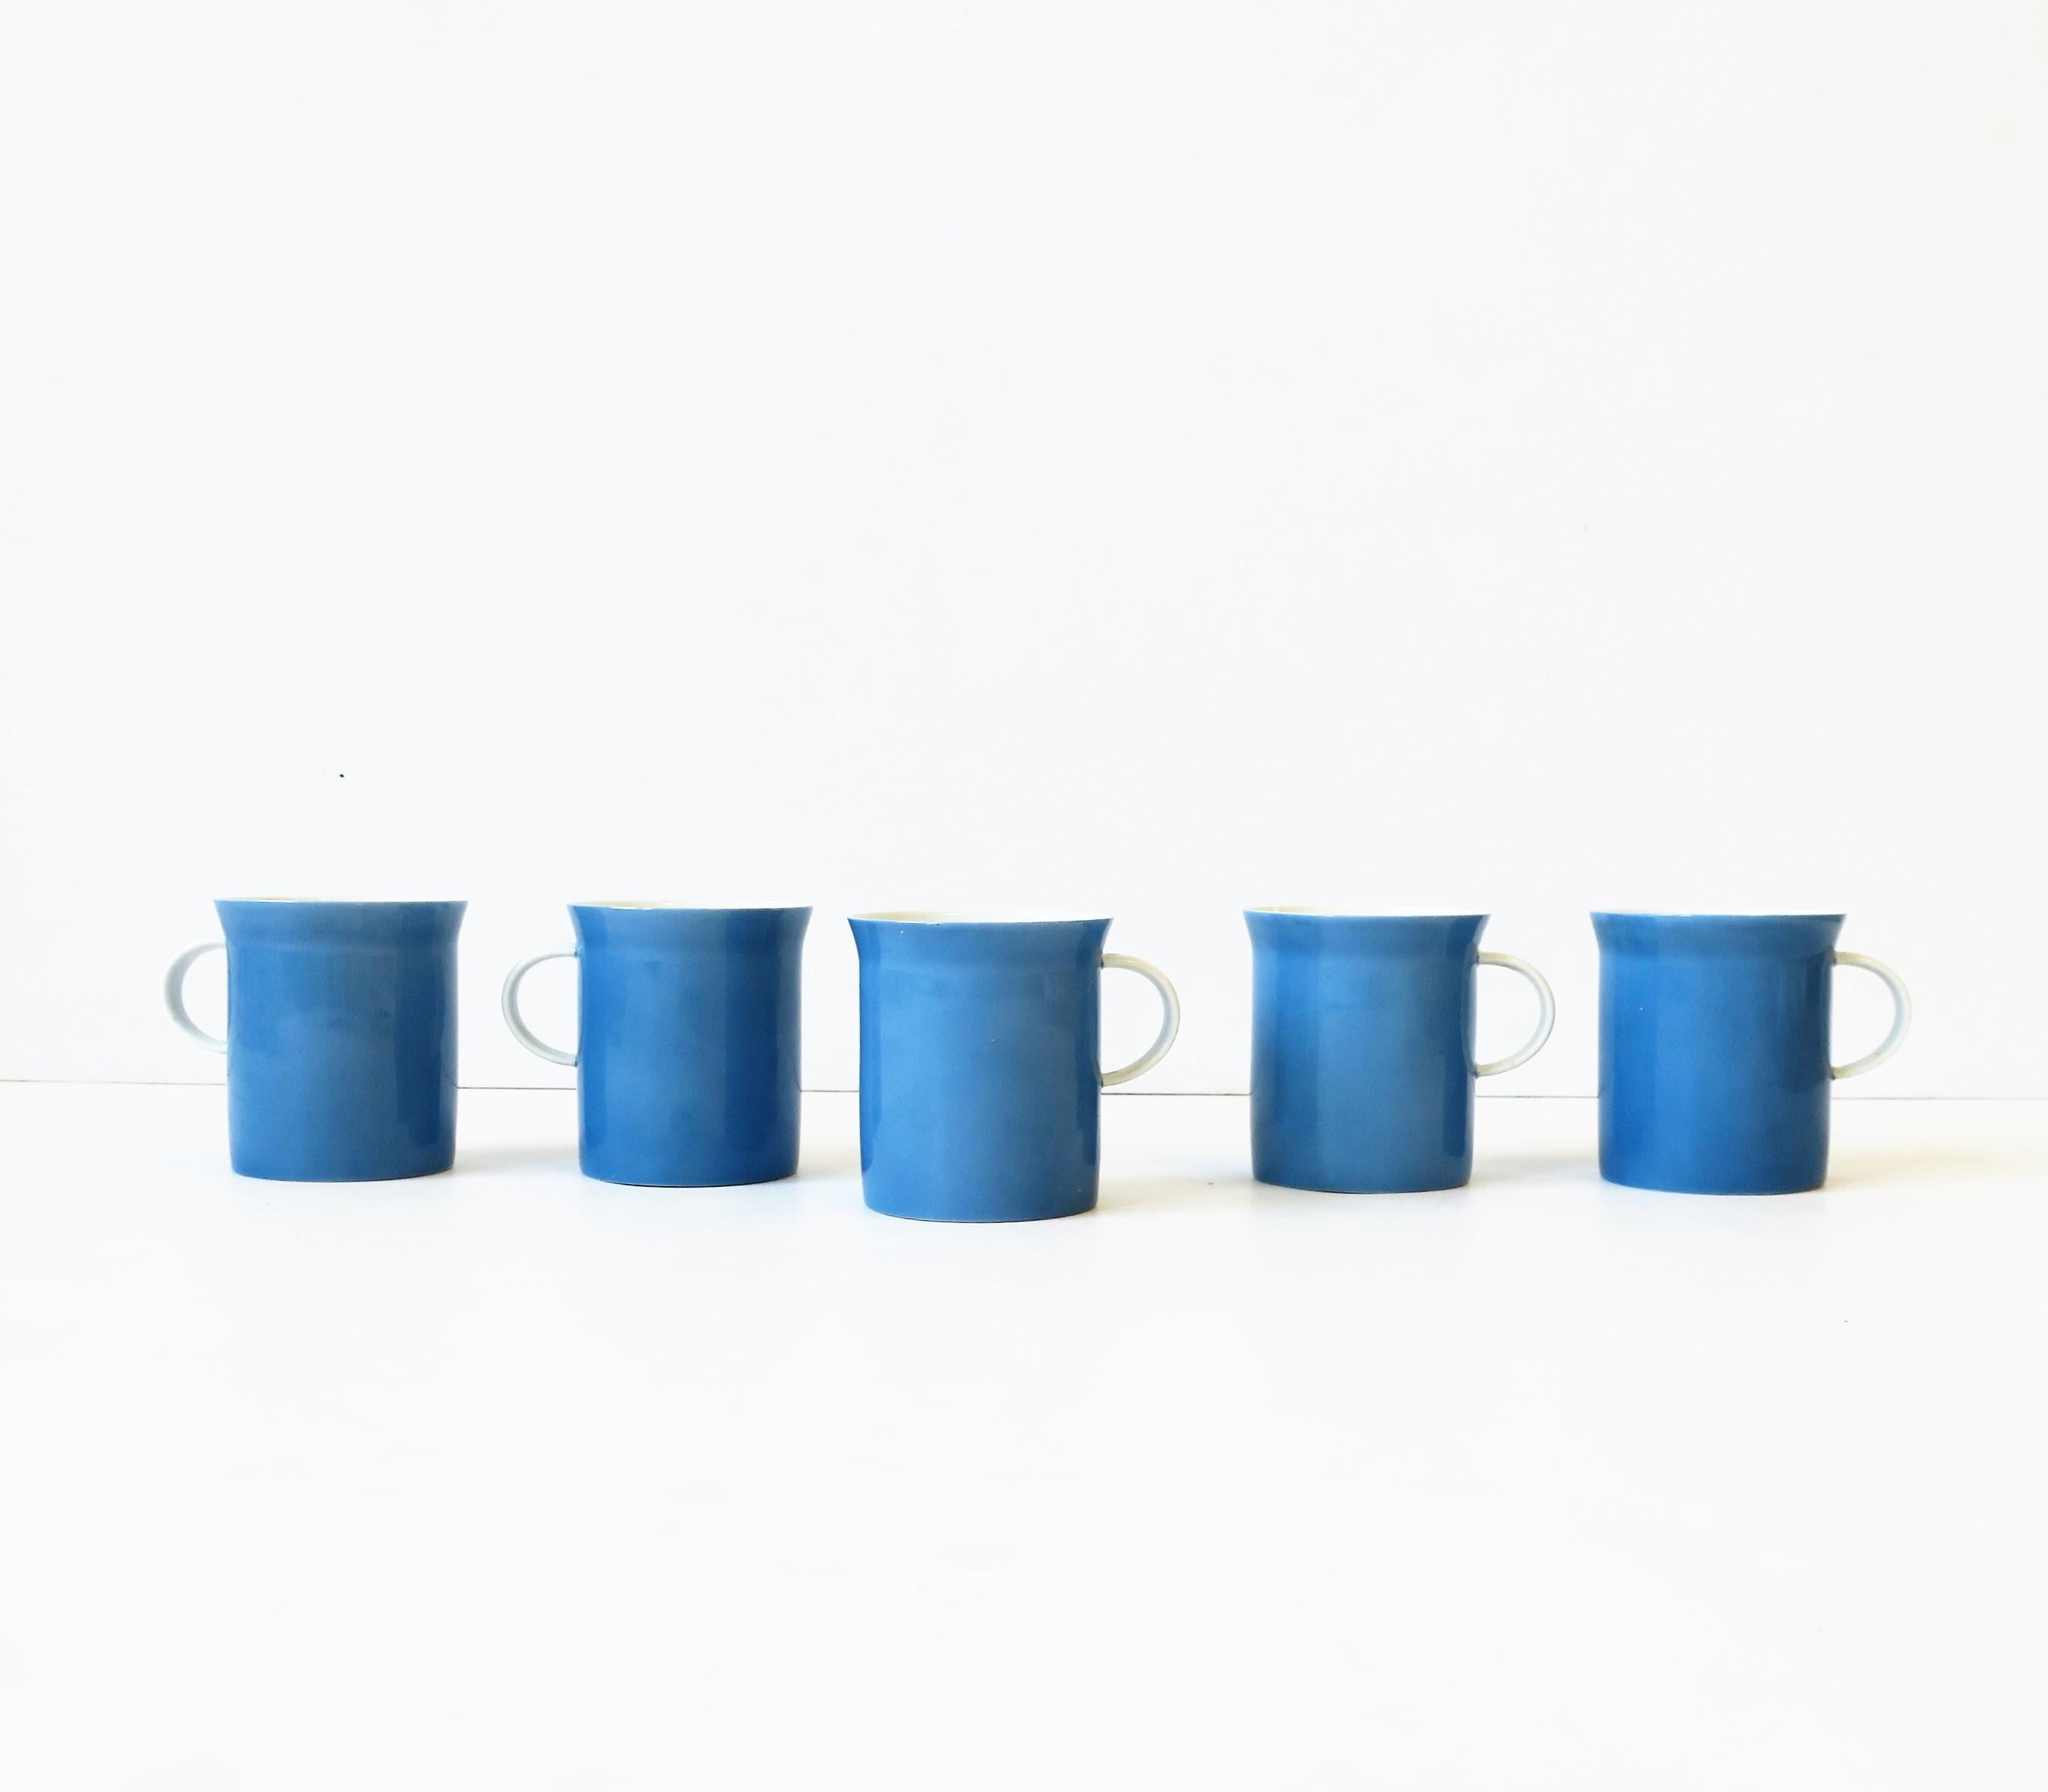 Mid-Century Modern Modern Blue and White Porcelain Coffee or Tea Cups by Rosenthal 